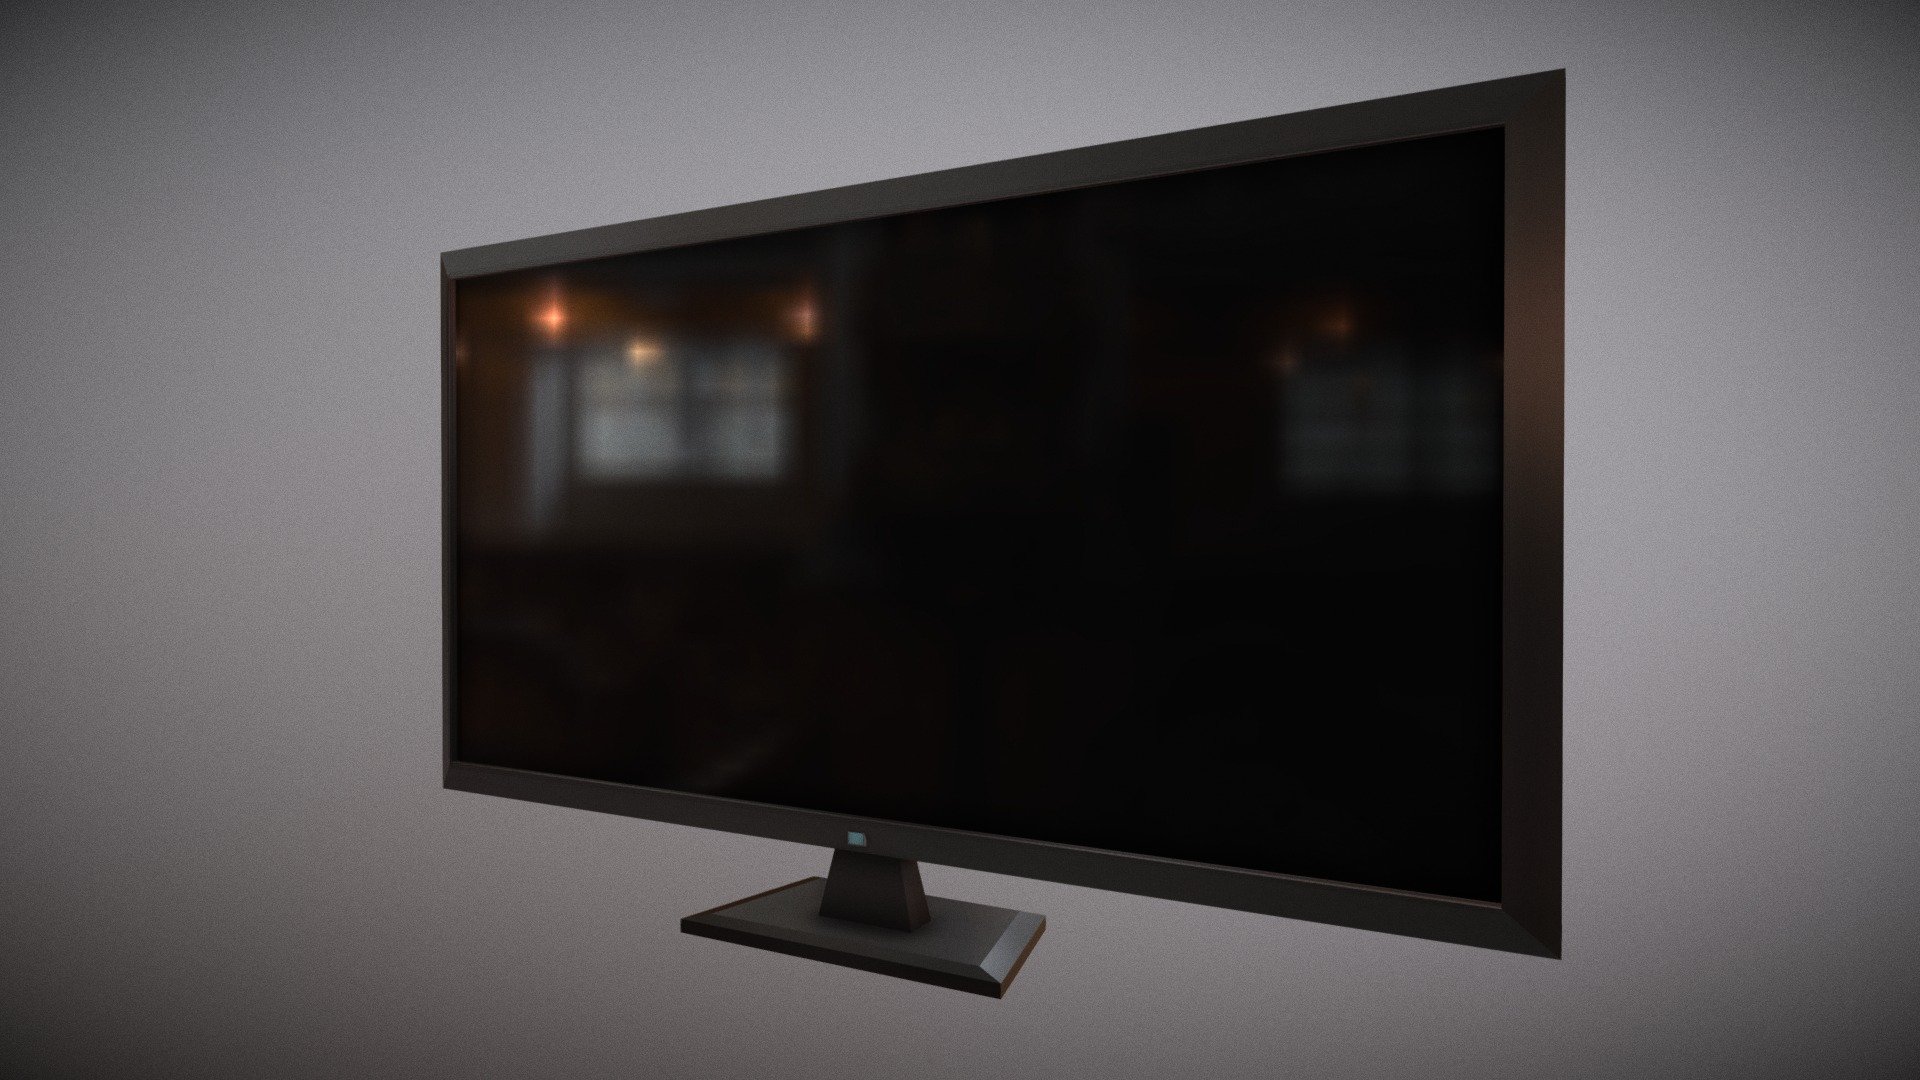 A Simple Low Poly TV

Free to Download / Free to Use

Check my Recent LED TV Model
https://skfb.ly/6wvBt - LED TV (Low Poly) (FREE) - Download Free 3D model by VX-Designs (@vxdesigns) 3d model